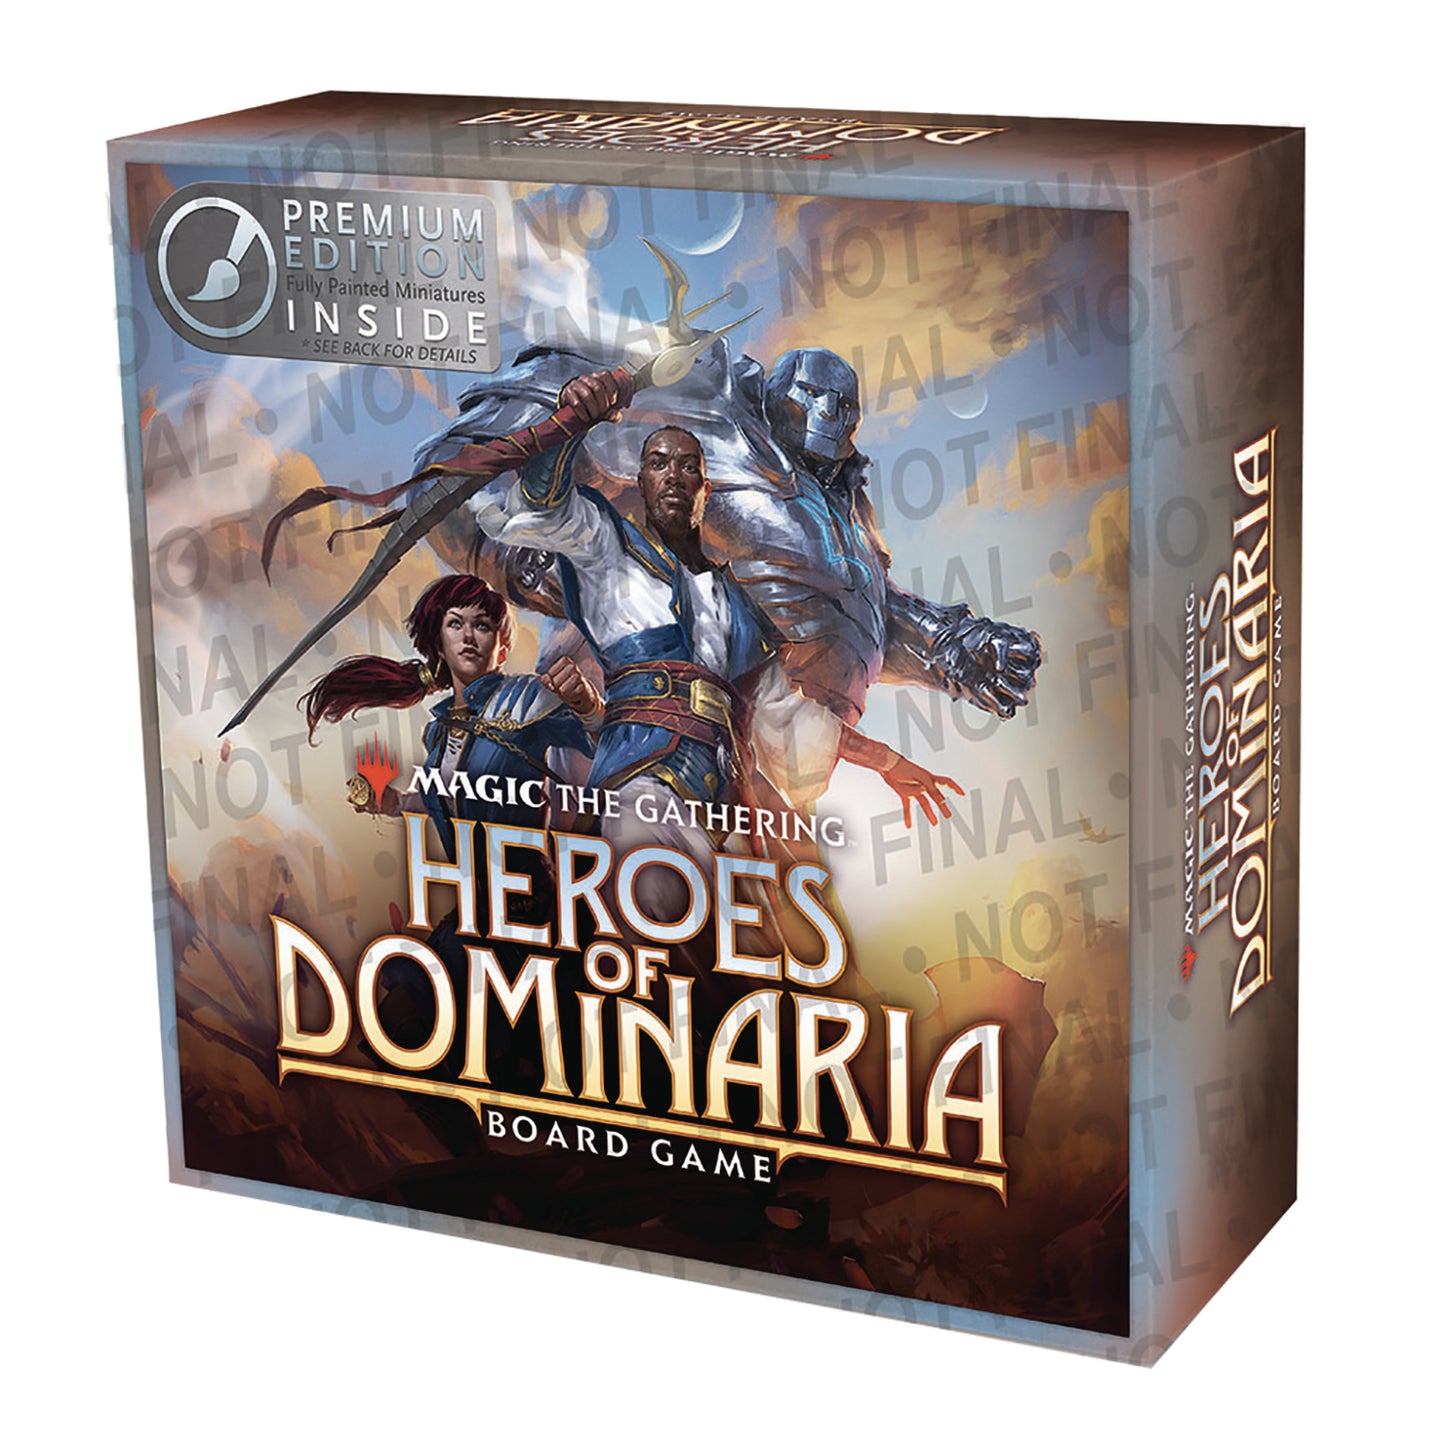 Magic the Gathering Heroes Of Dominaria Board Game